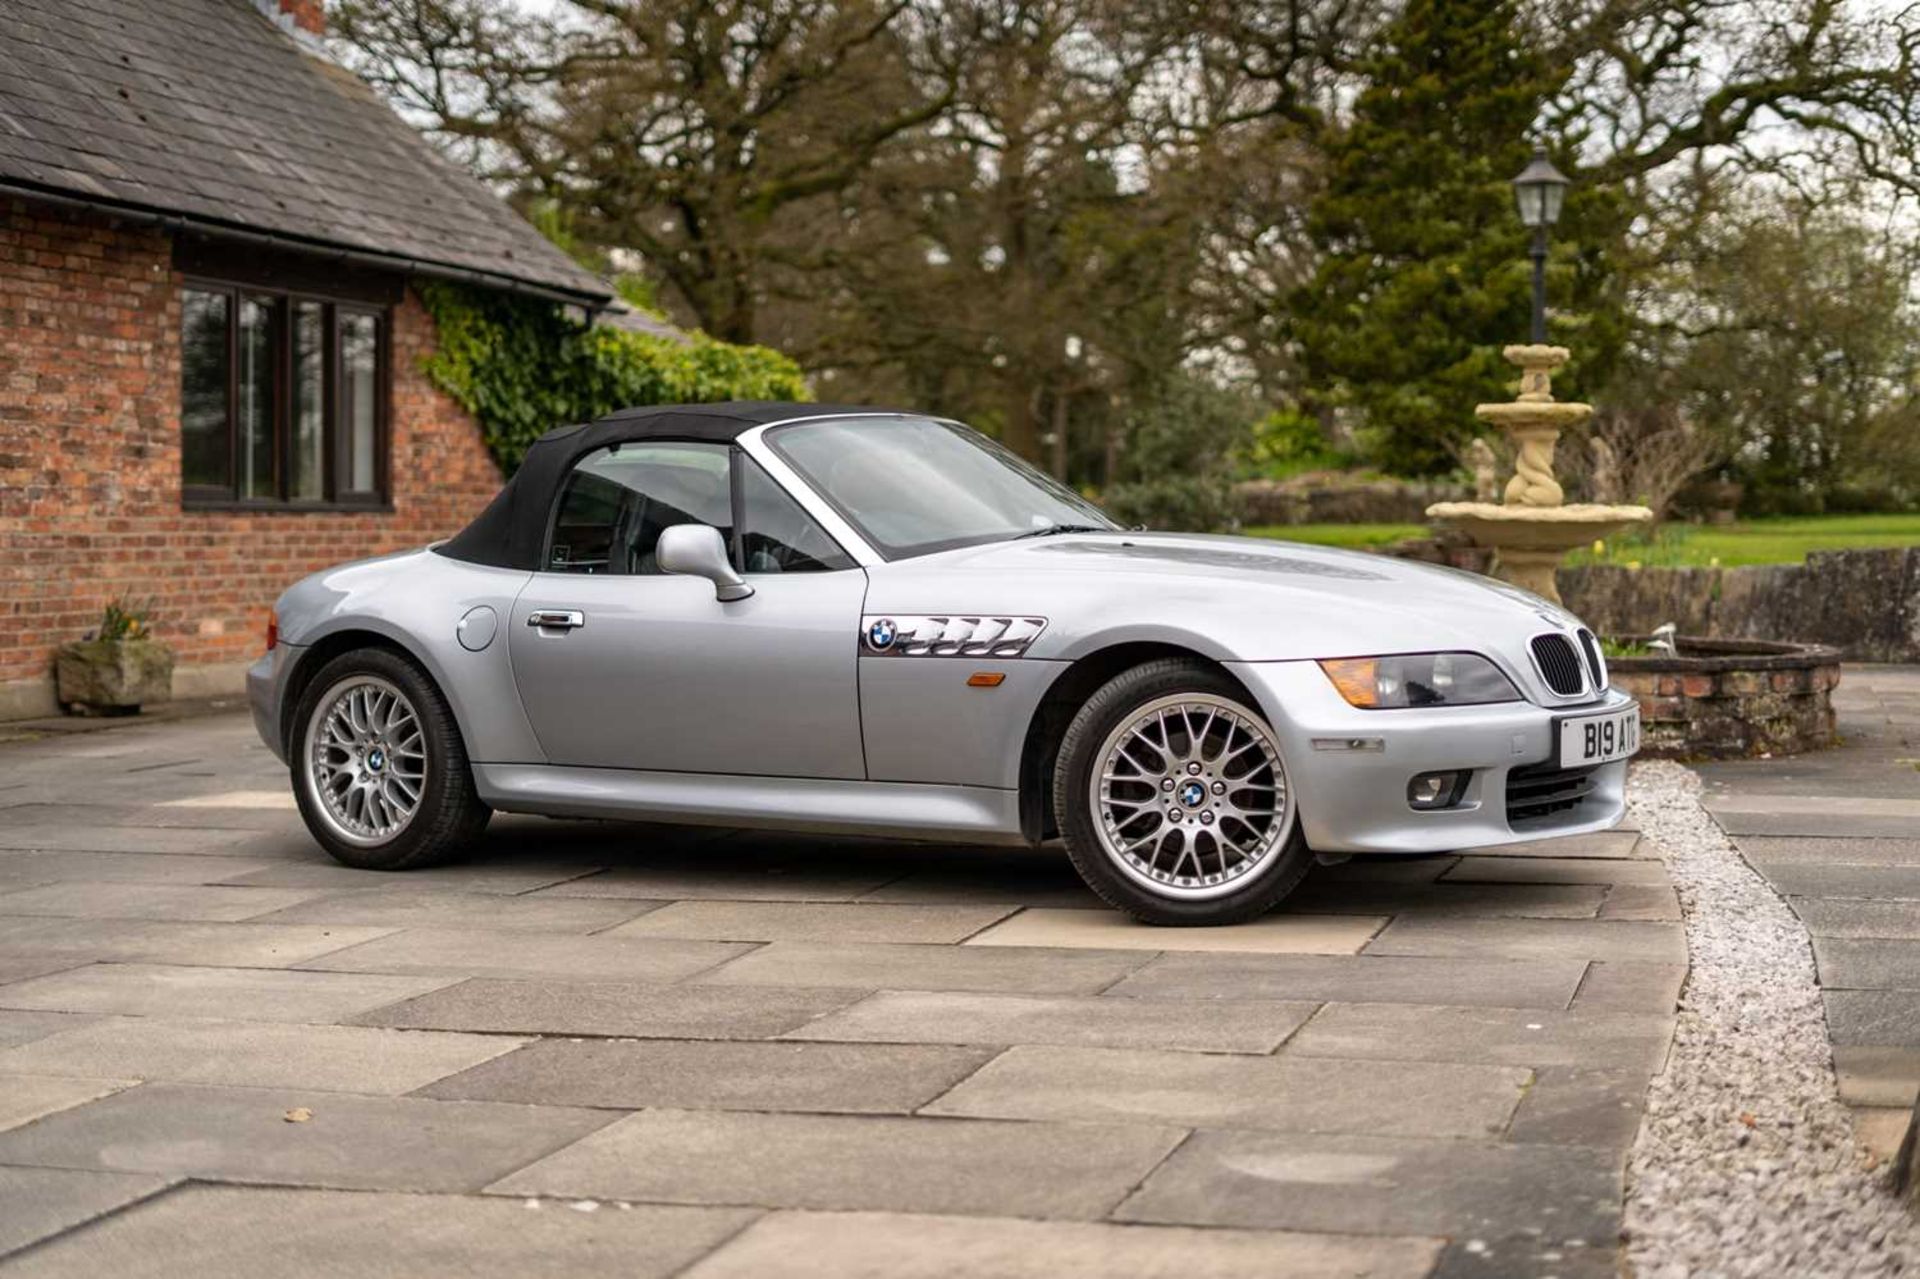 1997 BMW Z3 2.8 Same family ownership for 22 years, Desirable manual with 12 months MOT  - Image 3 of 66